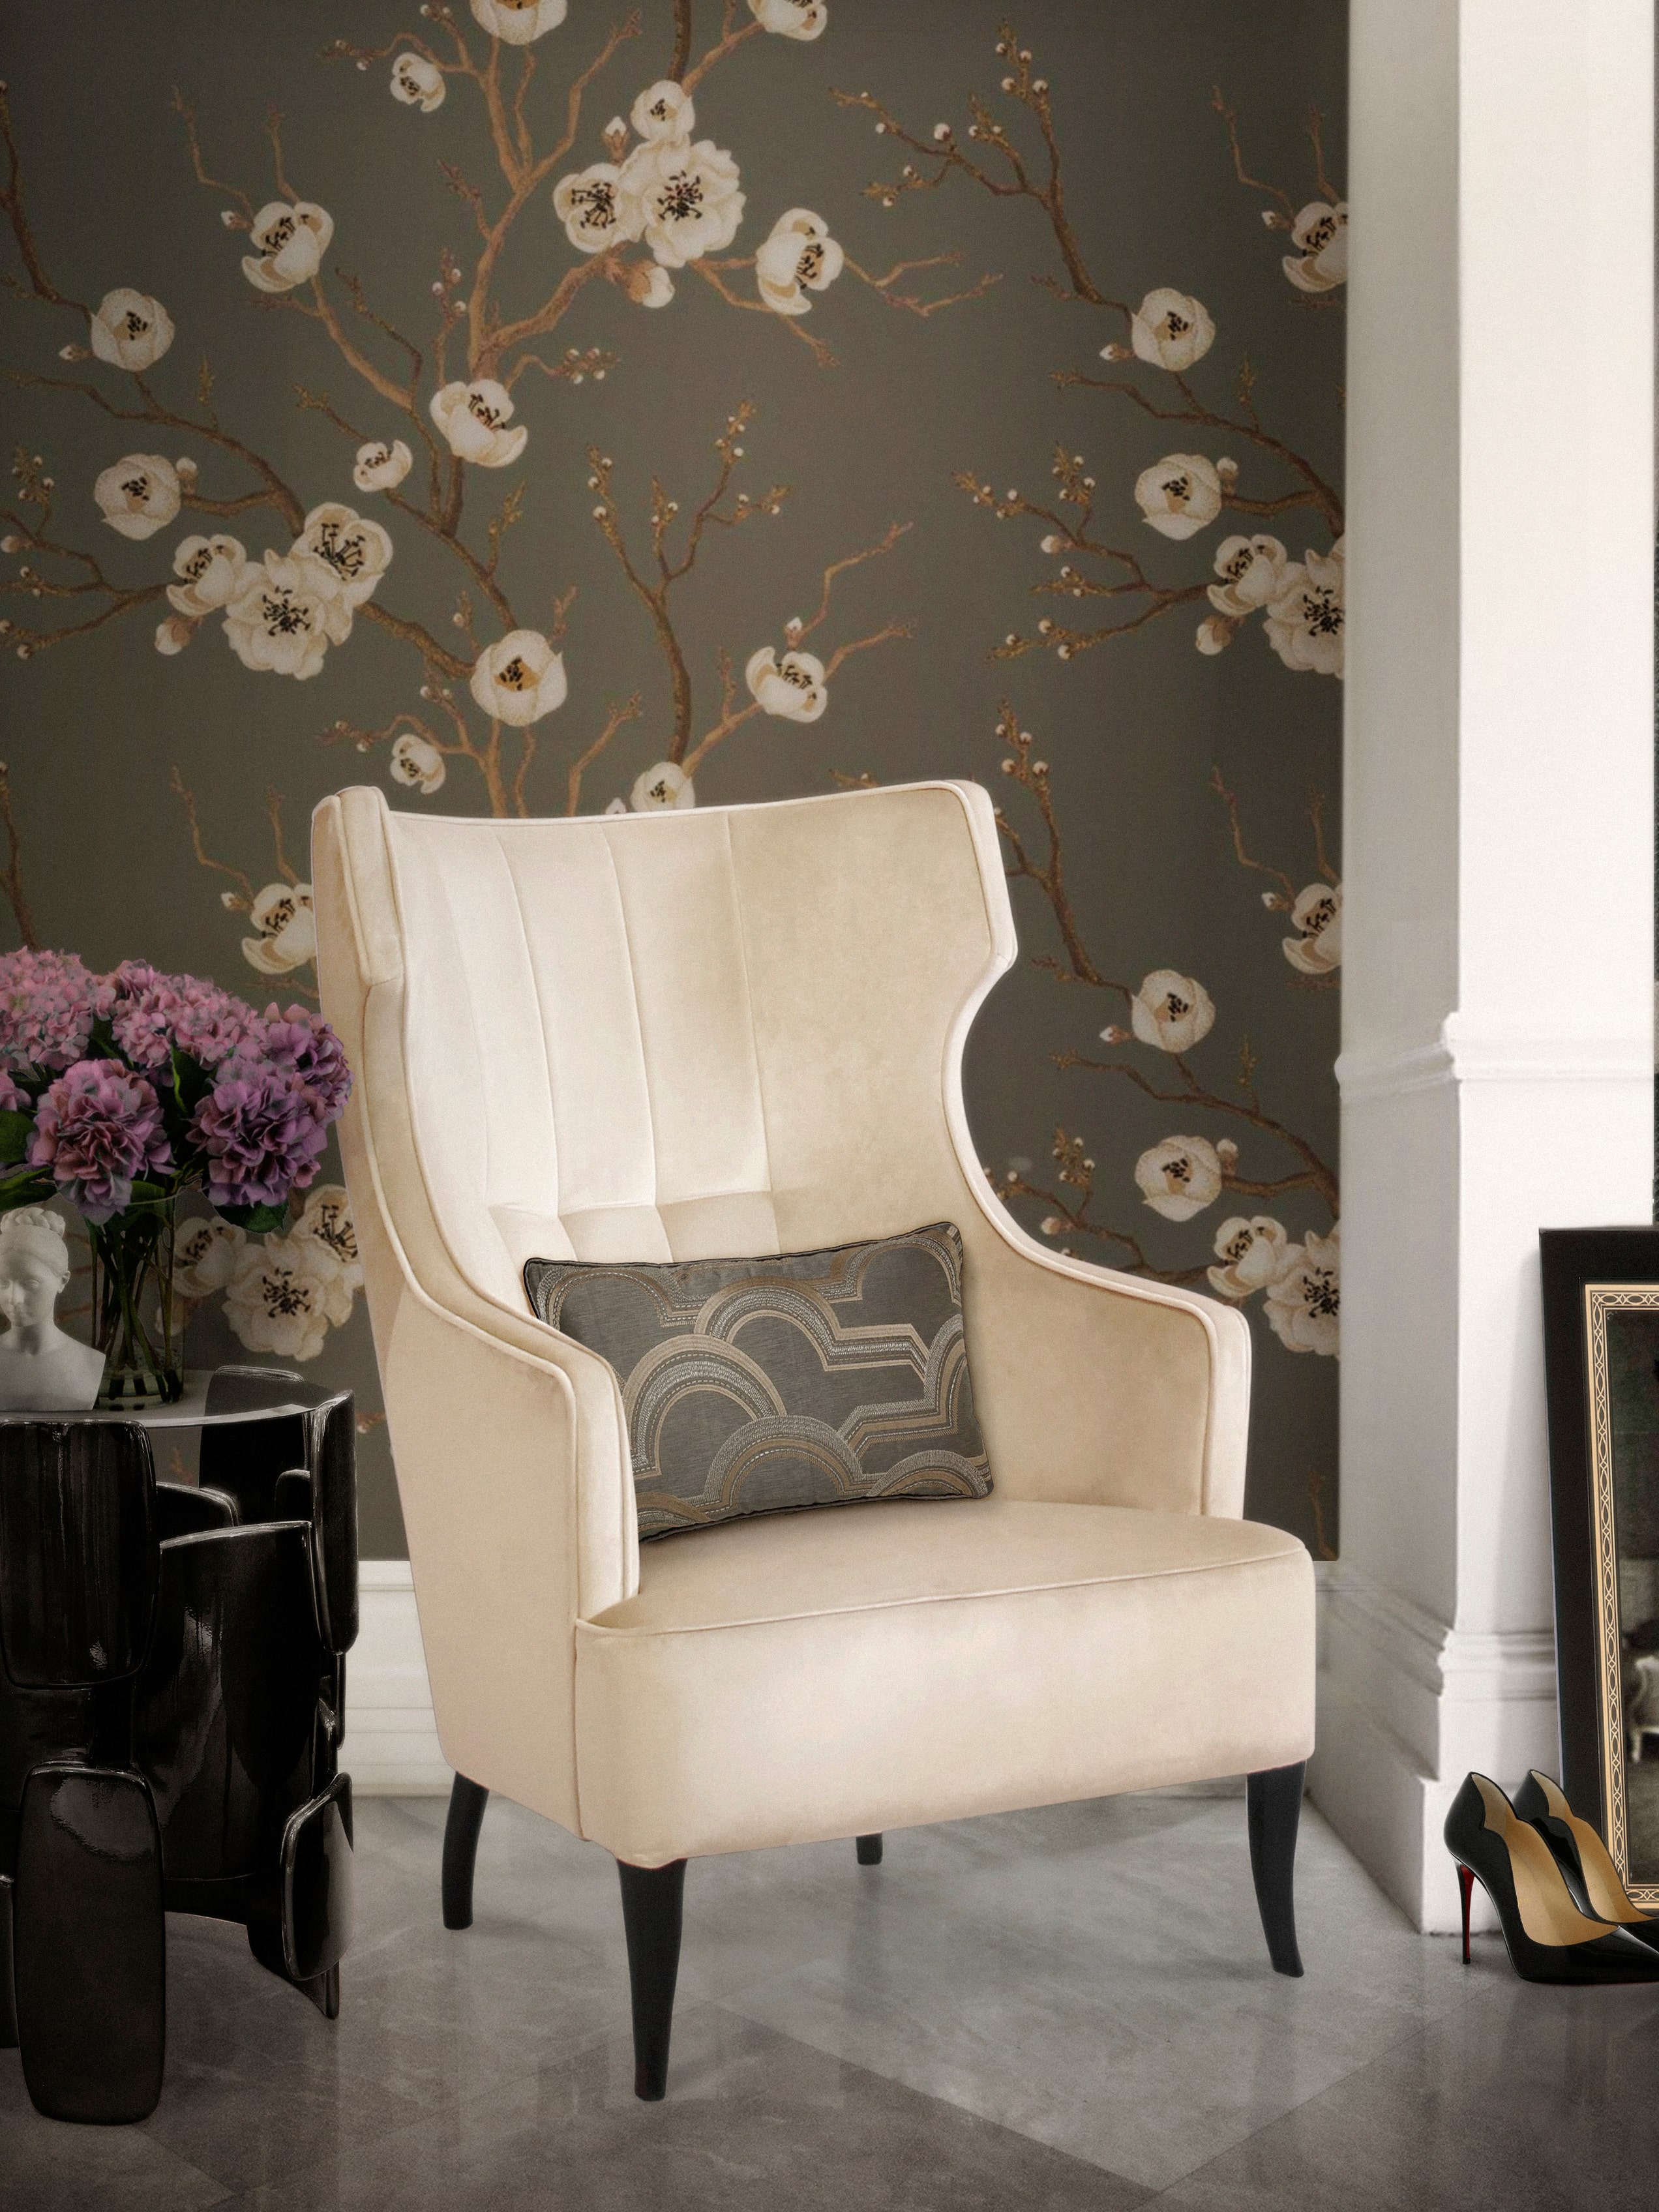 Home Library Decor With A Magnificent Velvet Armchair - Home'Society